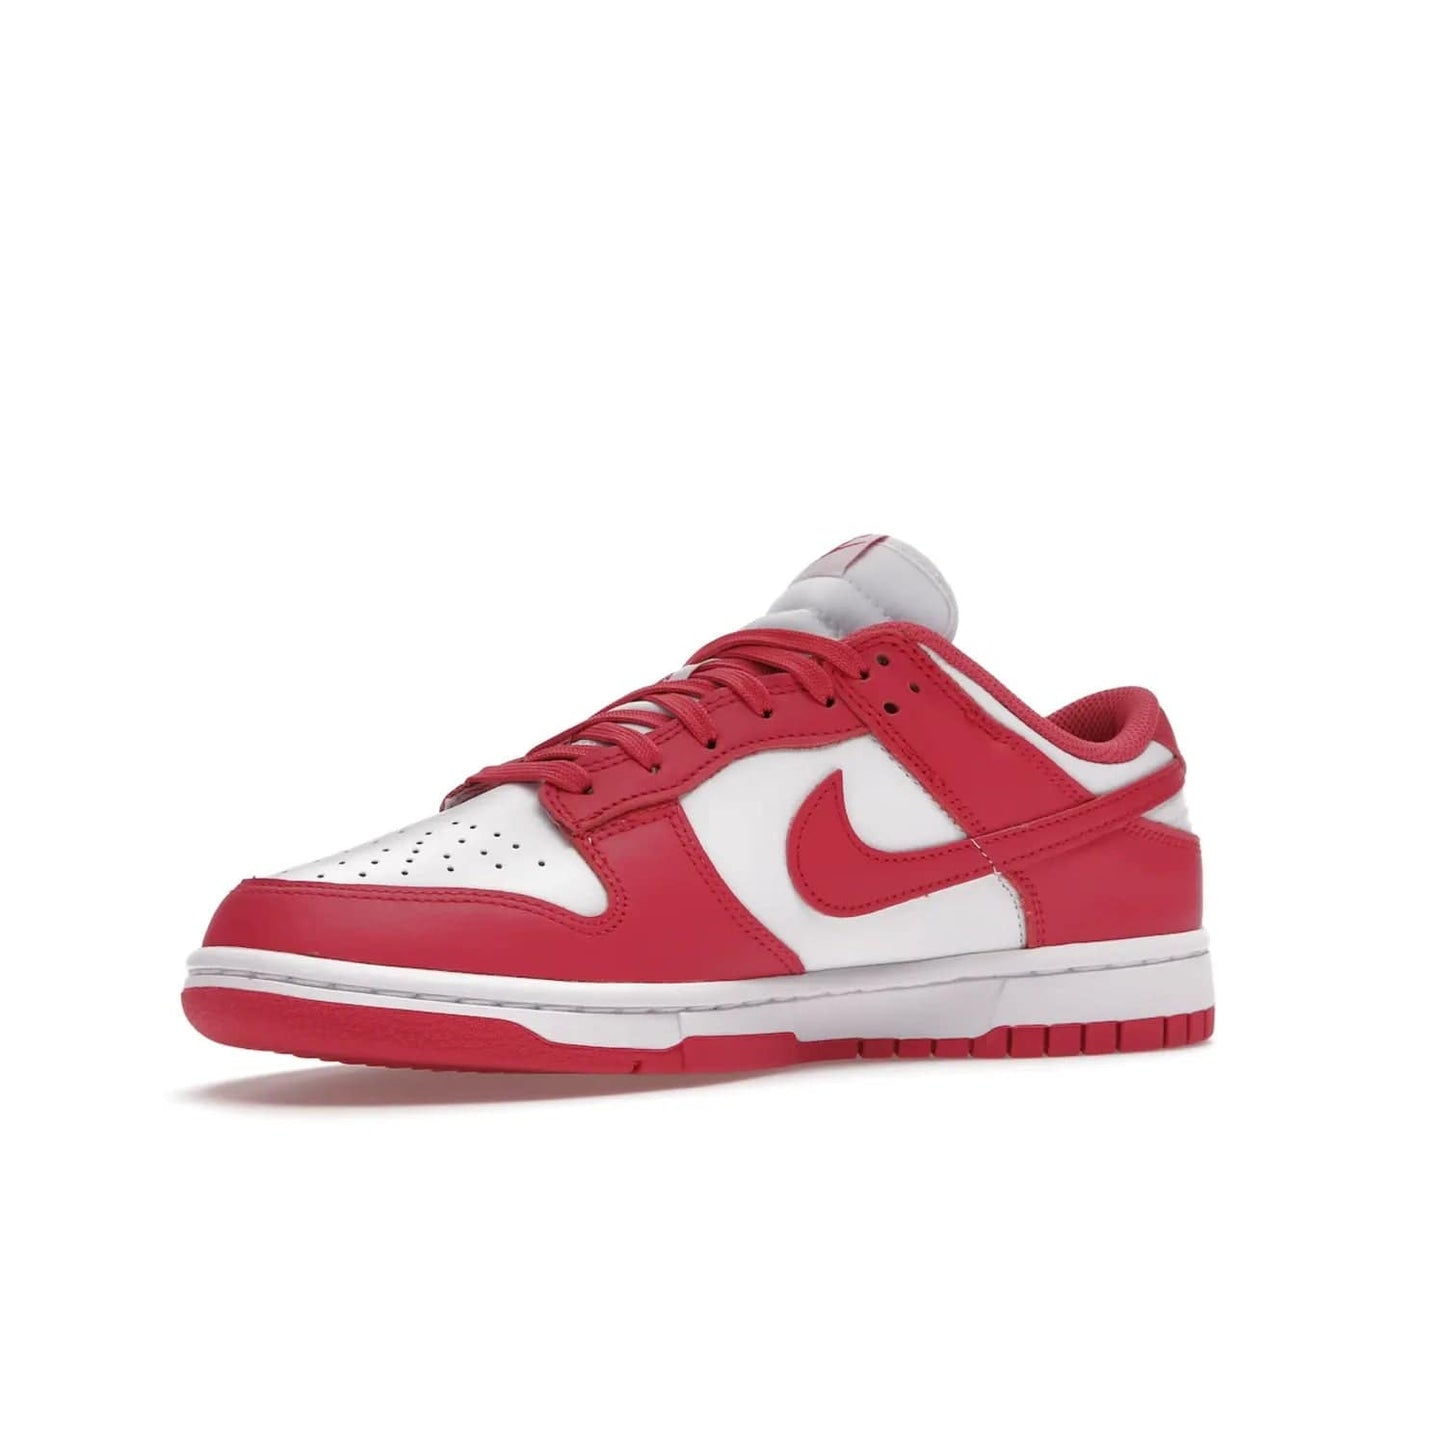 Nike Dunk Low Archeo Pink (Women's) - Image 16 - Only at www.BallersClubKickz.com - Introducing the stylish and comfortable Nike Dunk Low Archeo Pink (Women's). White/Archeo Pink colorway with white leather upper, pink overlays and Swooshes. Get yours now!